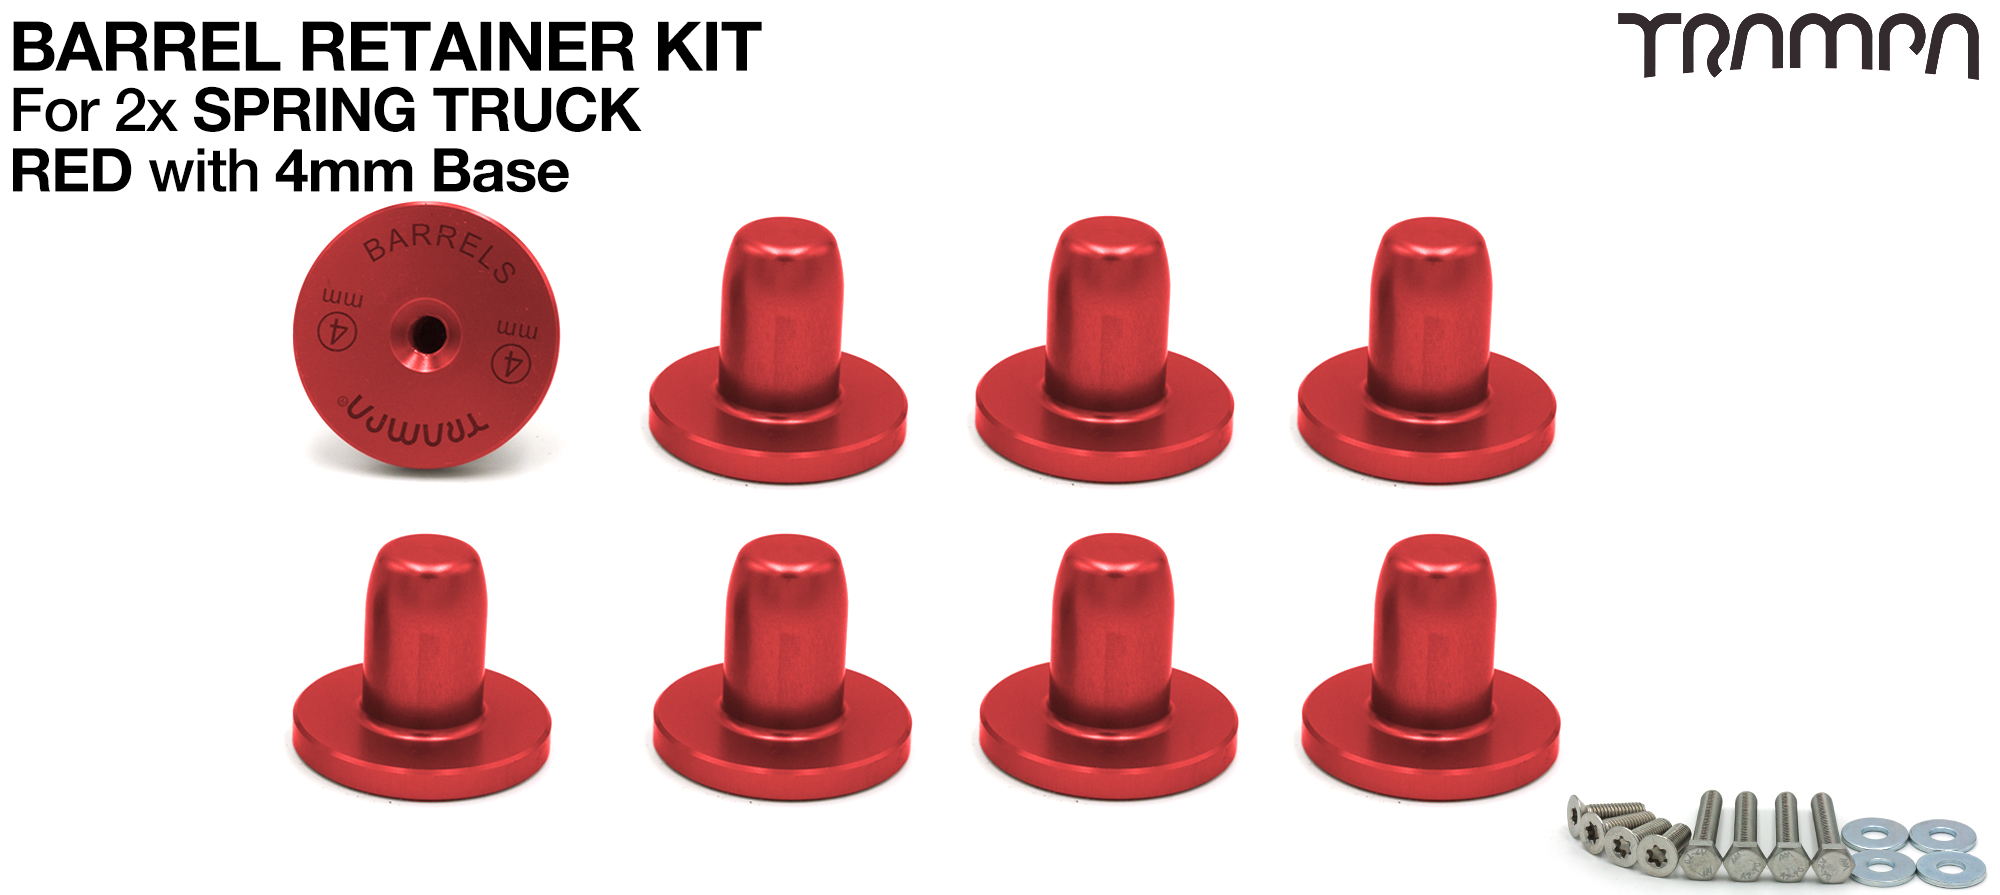 RED Barrel Retainers x8 with 4mm Base RED